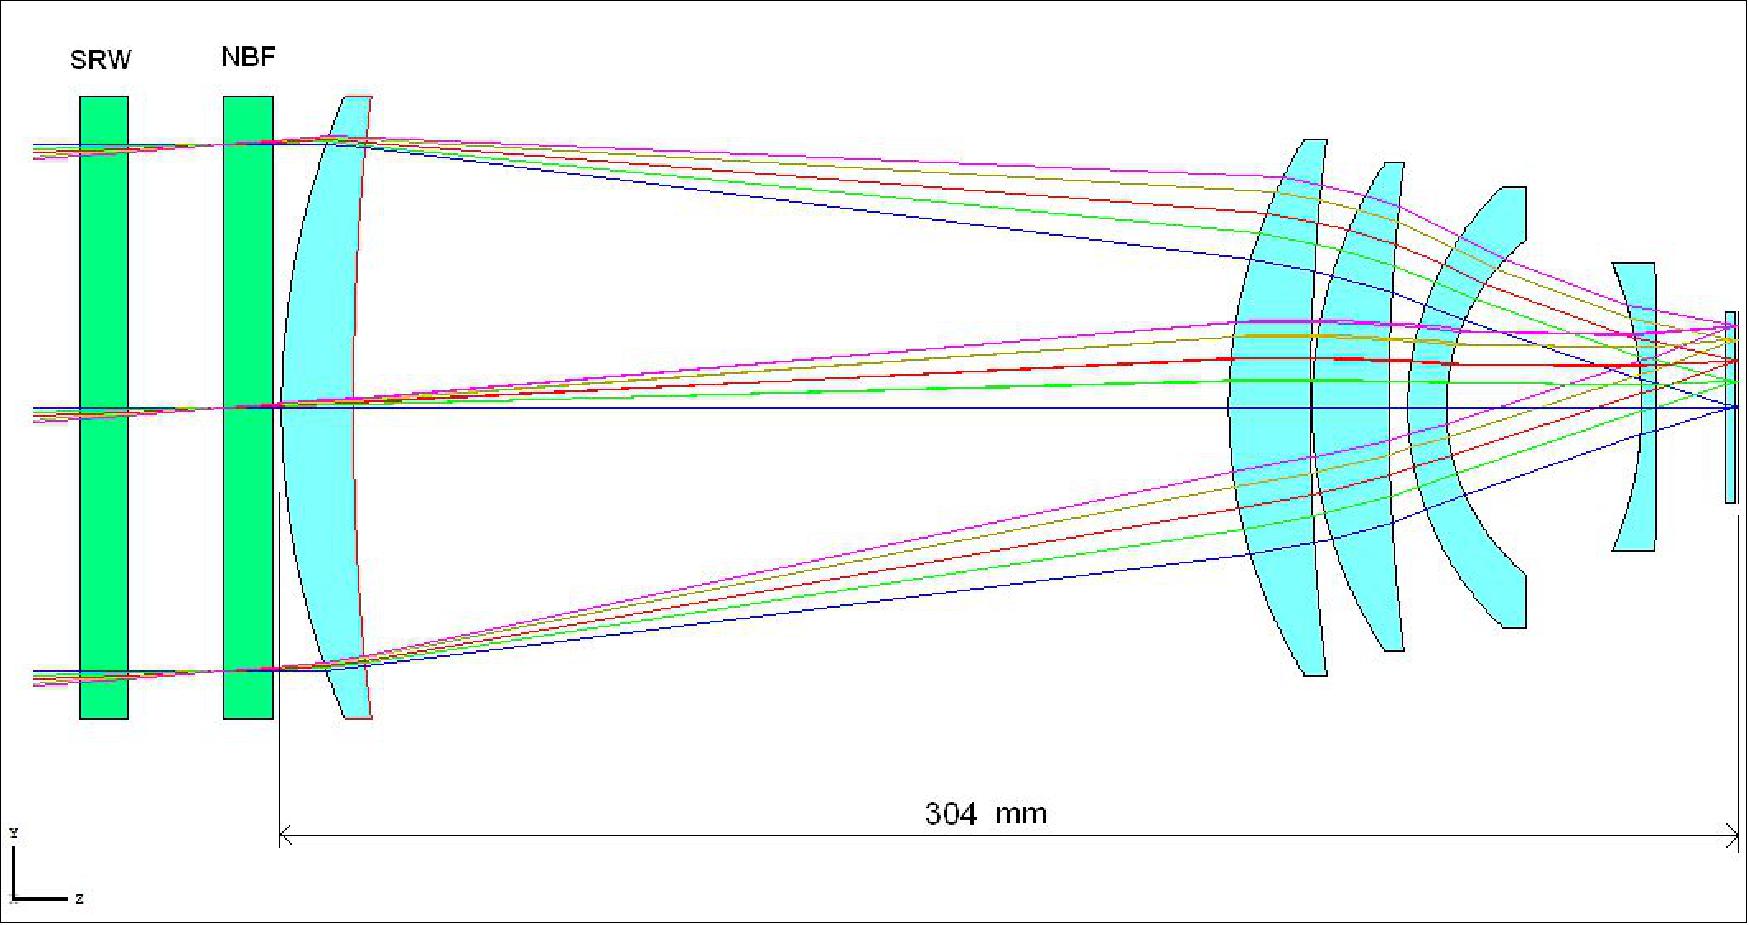 Figure 36: Schematic of the optical layout (image credit: Selex Galileo)